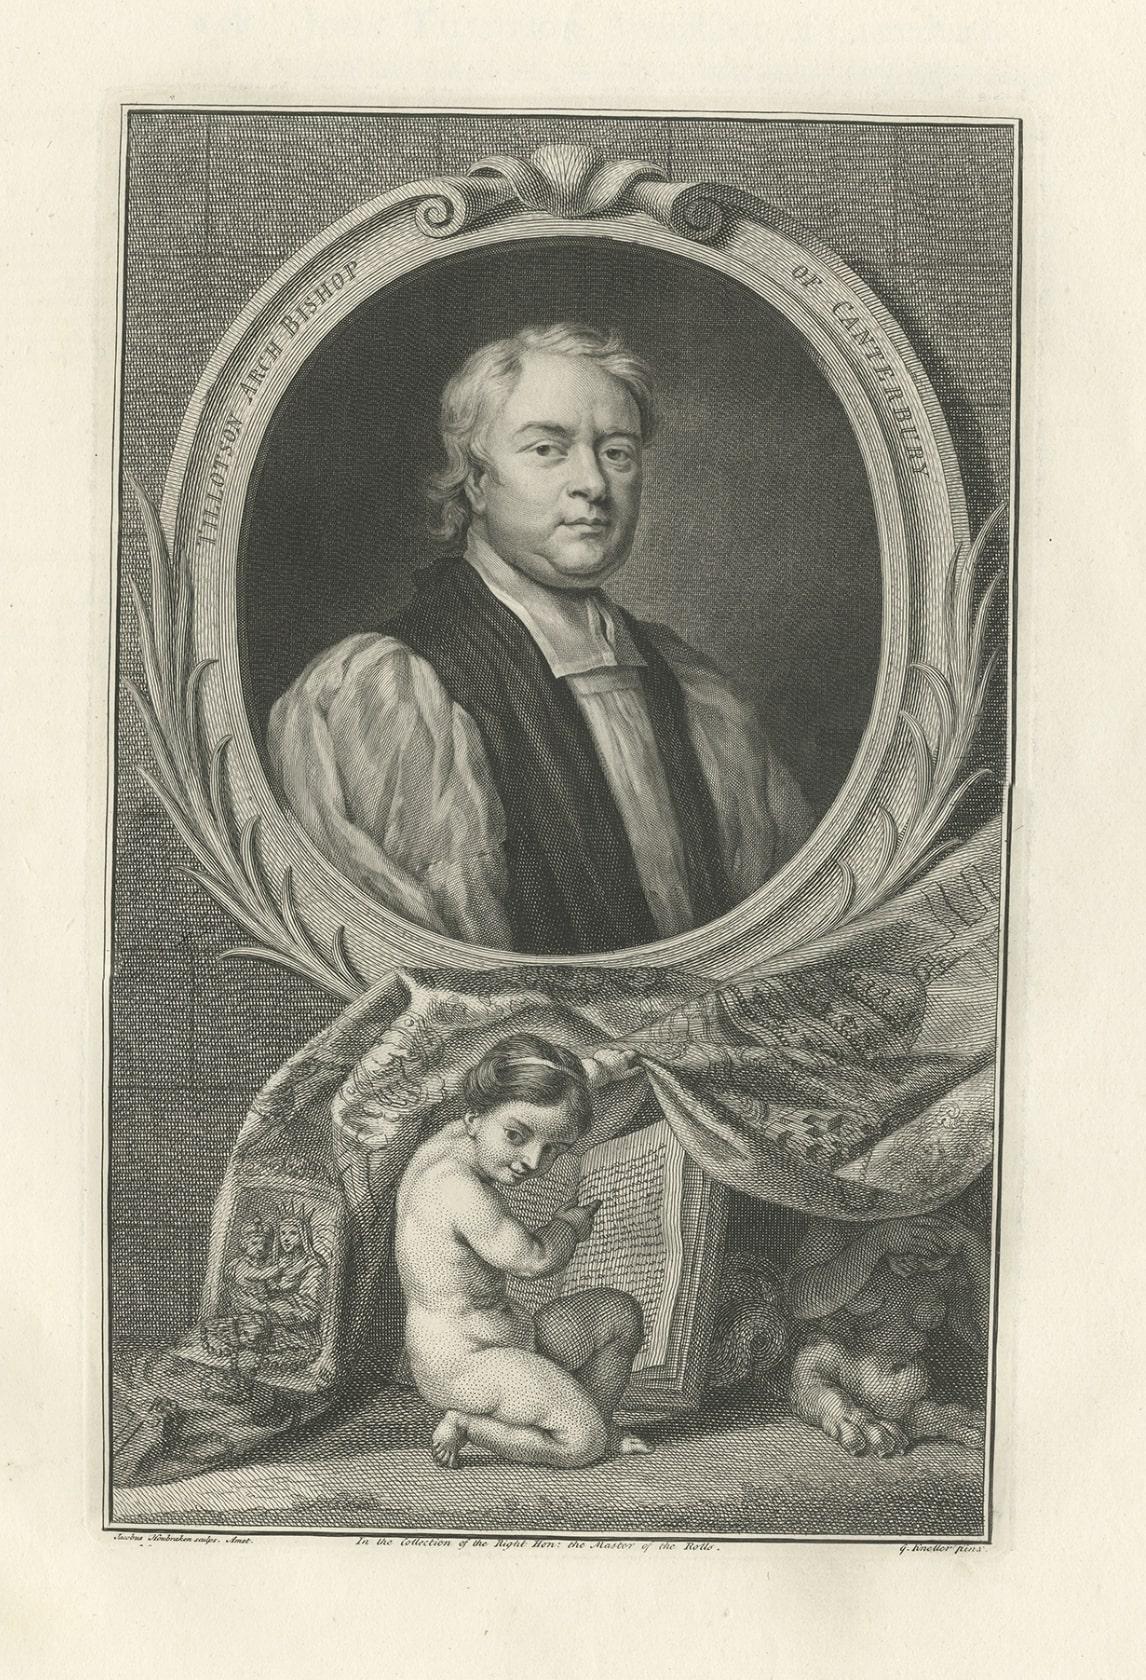 Paper Antique Portrait of John Tillotson, the Anglican Archbishop of Canterbury For Sale